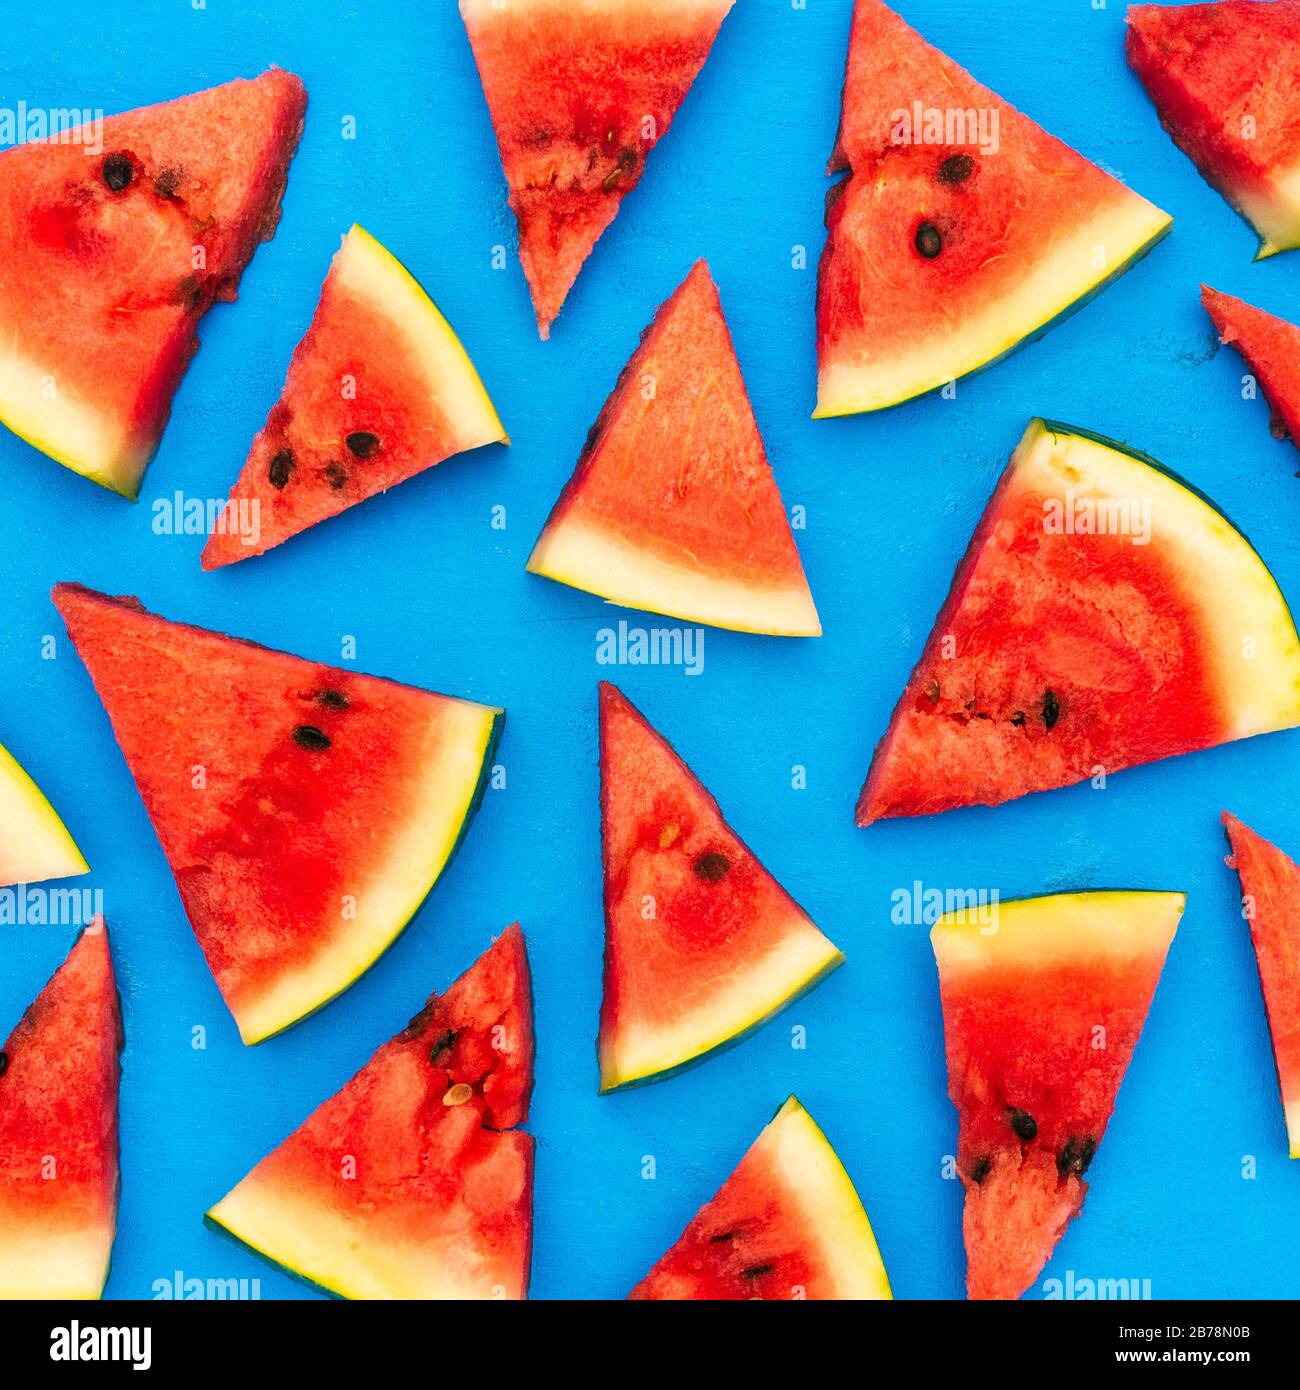 Slices of a watermelon triangular in shape on a blue background. Summer time concept Stock Photo